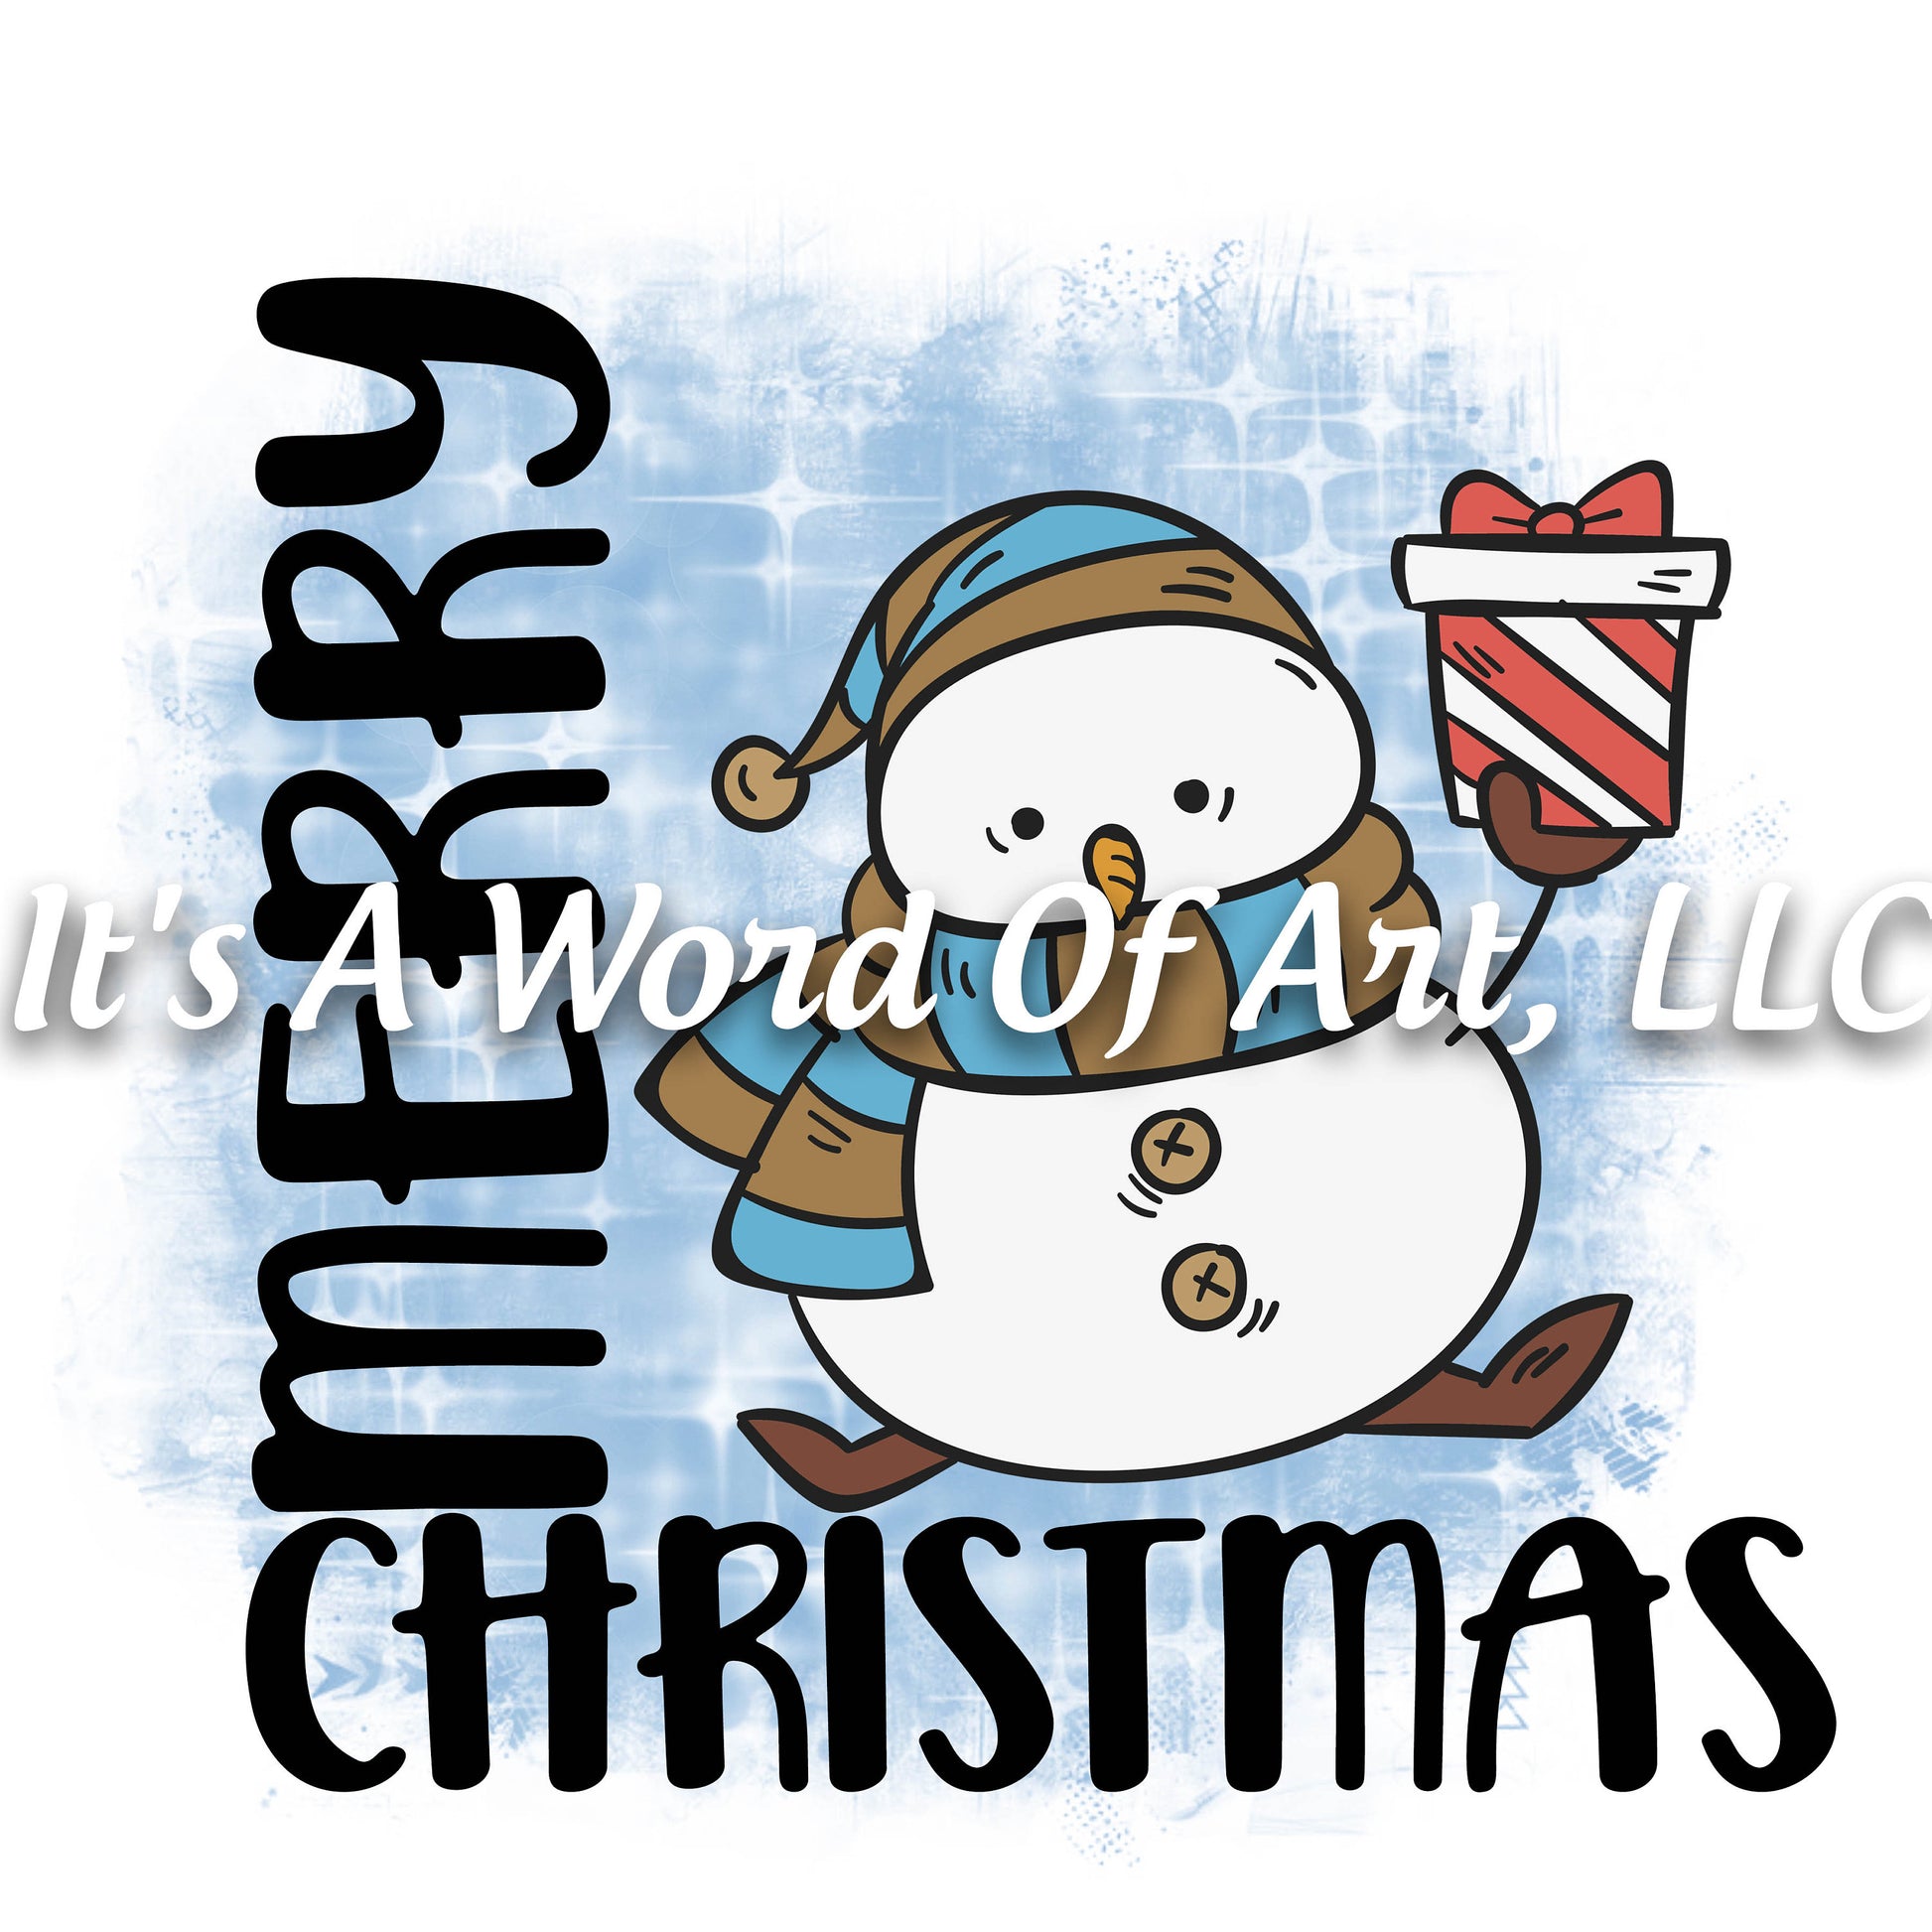 Christmas 139 - Merry Christmas Snowman Present - Sublimation Transfer Set/Ready To Press Sublimation Transfer/Sublimation Transfer